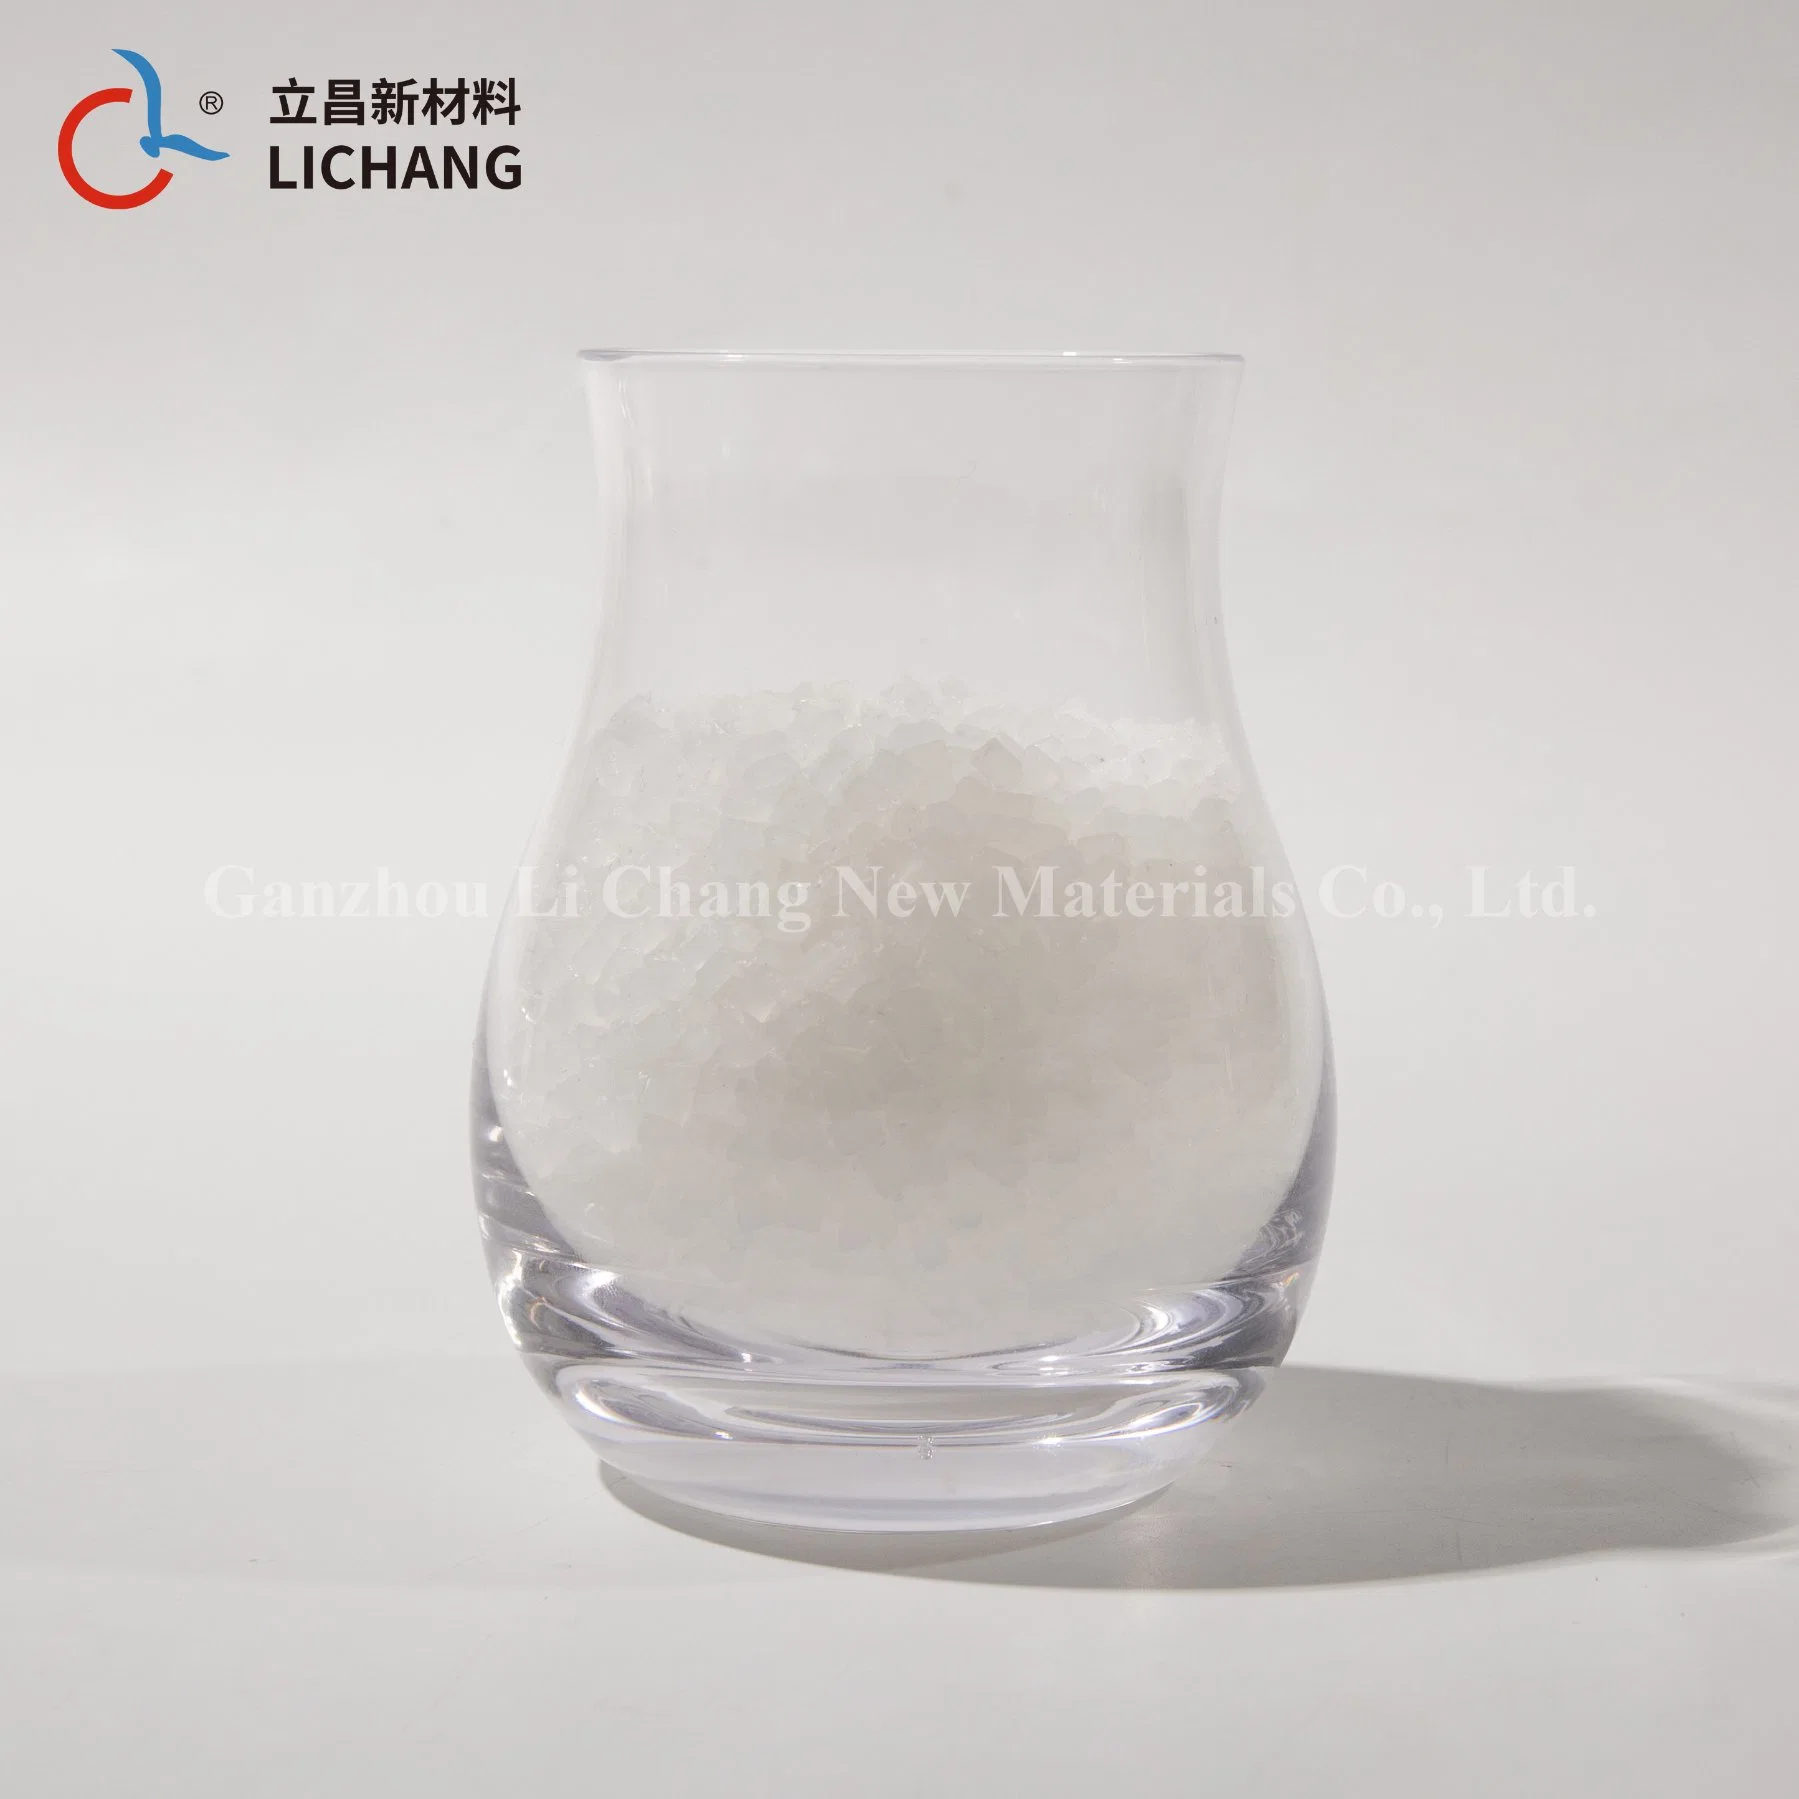 Plastic Raw Material ETFE Resin with Excellent Self-Lubrication Lichang